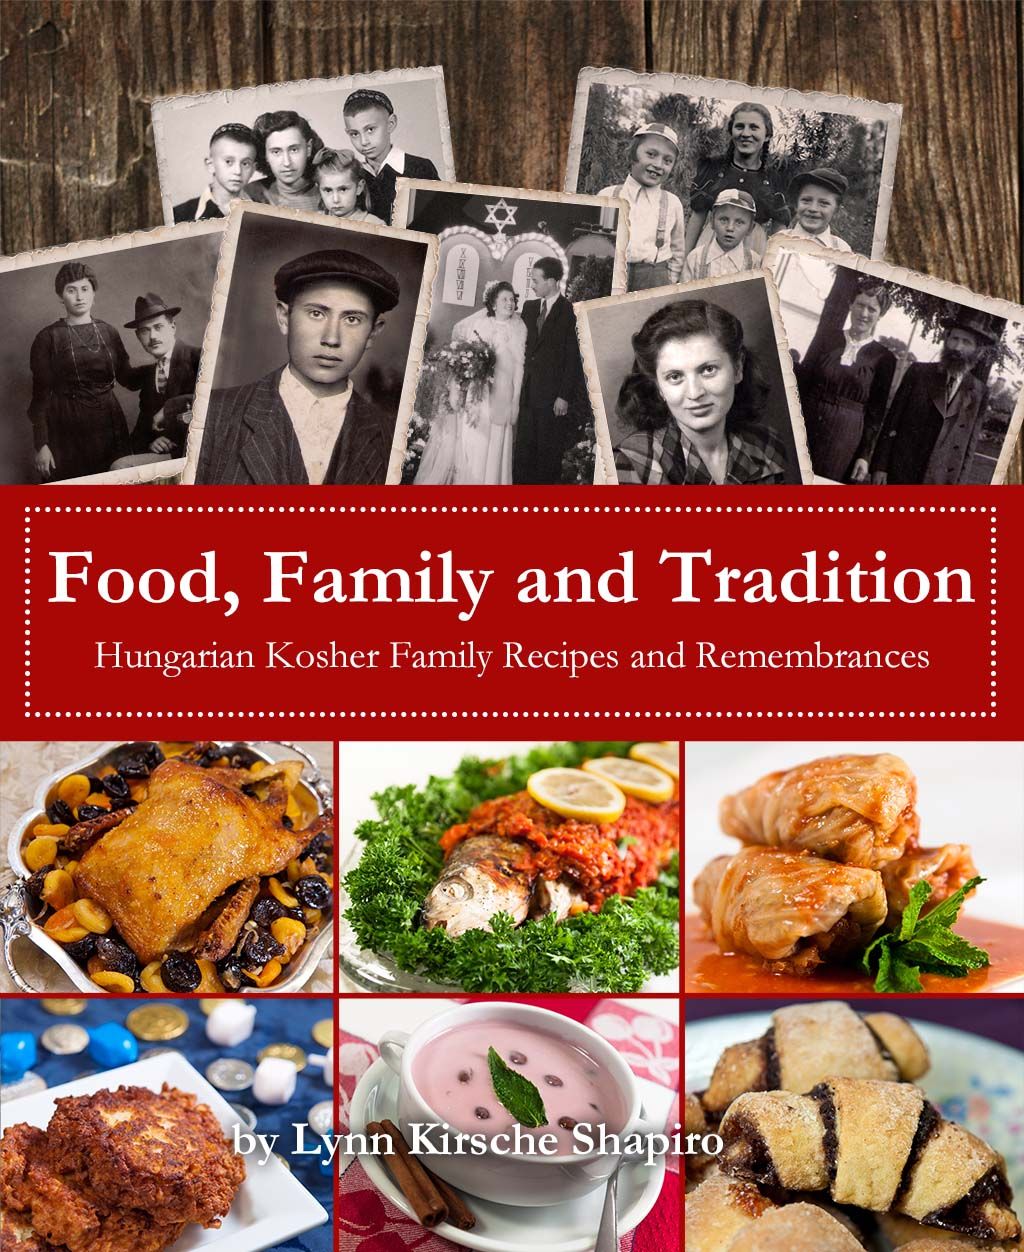 About Food, Family and Tradition